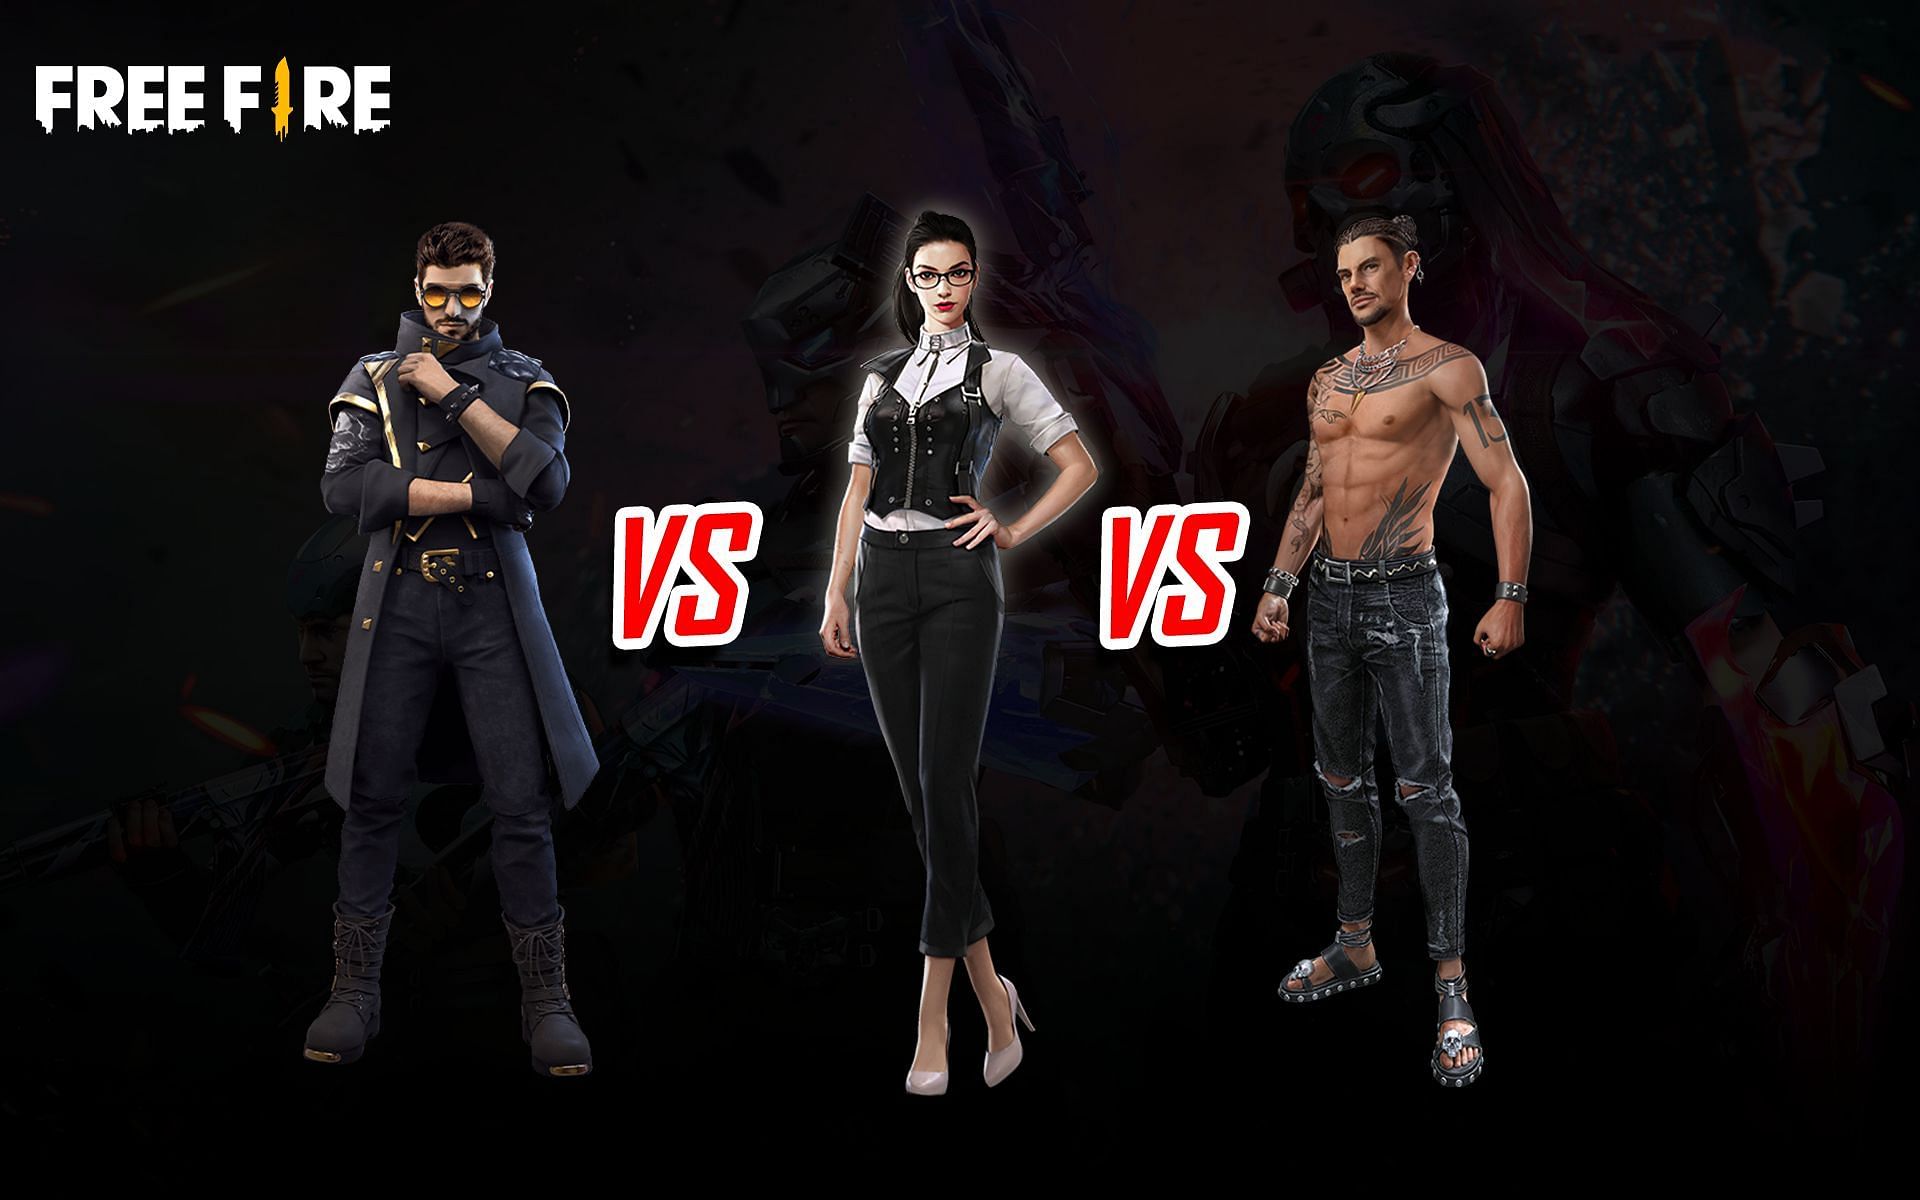 The OB33 update in Free Fire has shaken up the character hierarchy in-game (Image via Sportskeeda)